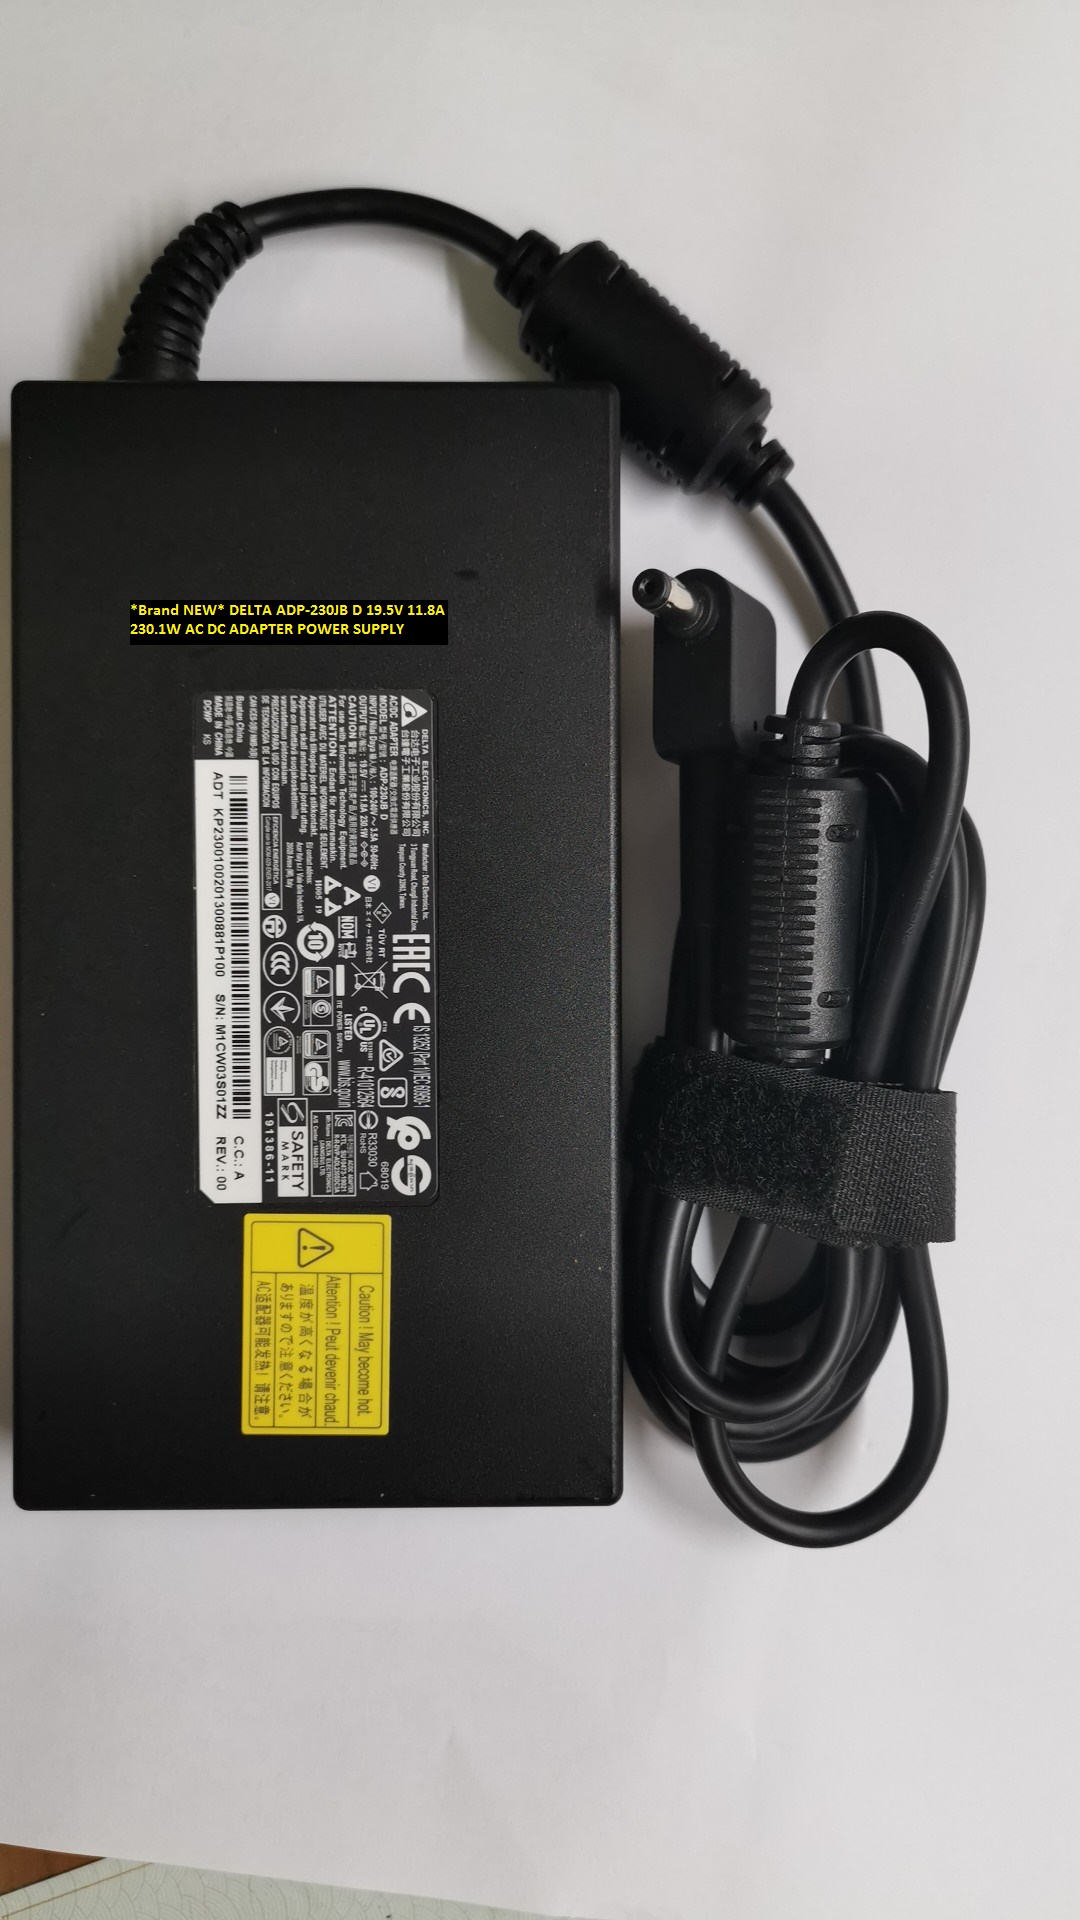 *Brand NEW* 19.5V 11.8A 230.1W DELTA ADP-230JB D AC DC ADAPTER POWER SUPPLY